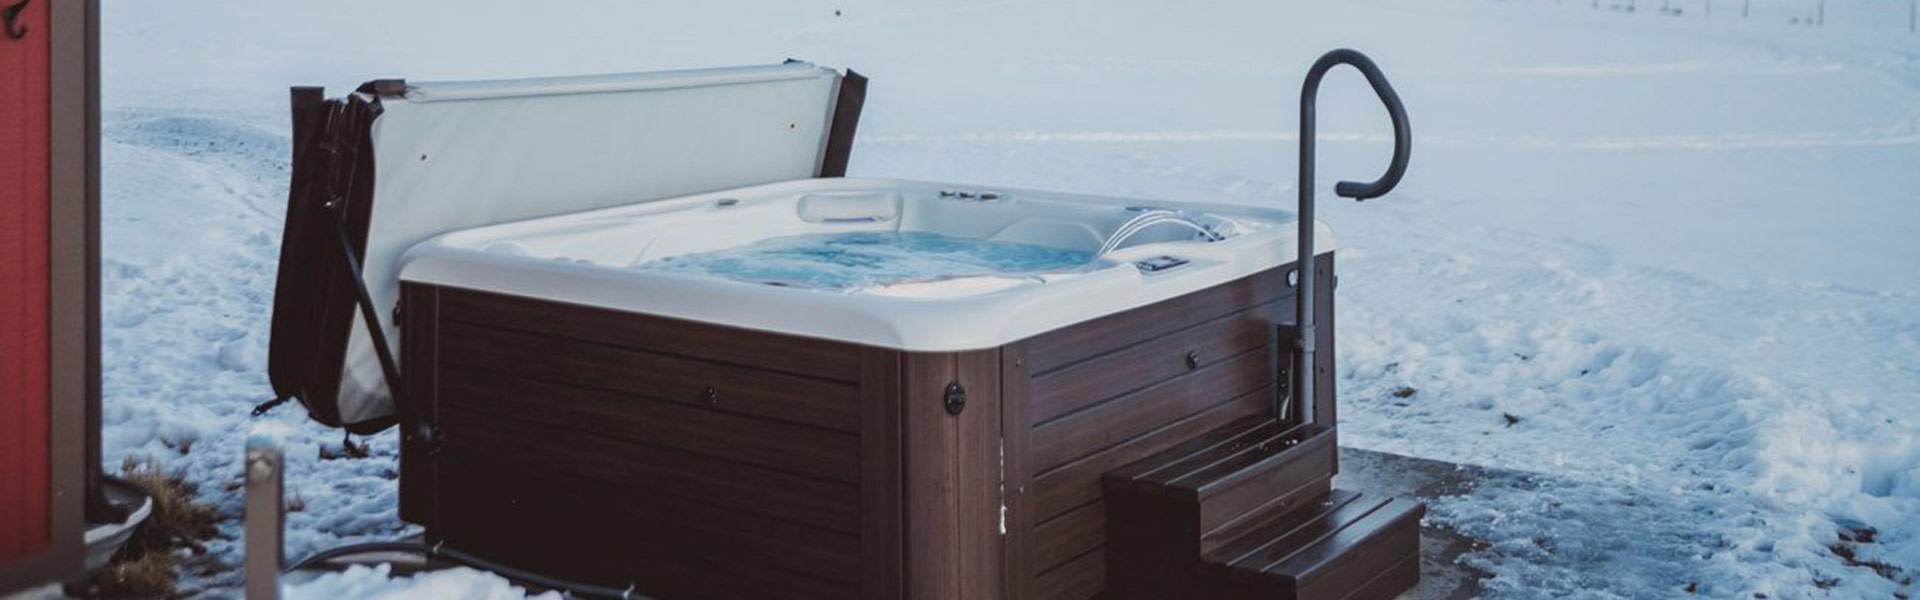 How To Enjoy Your Hot Tub This Winter